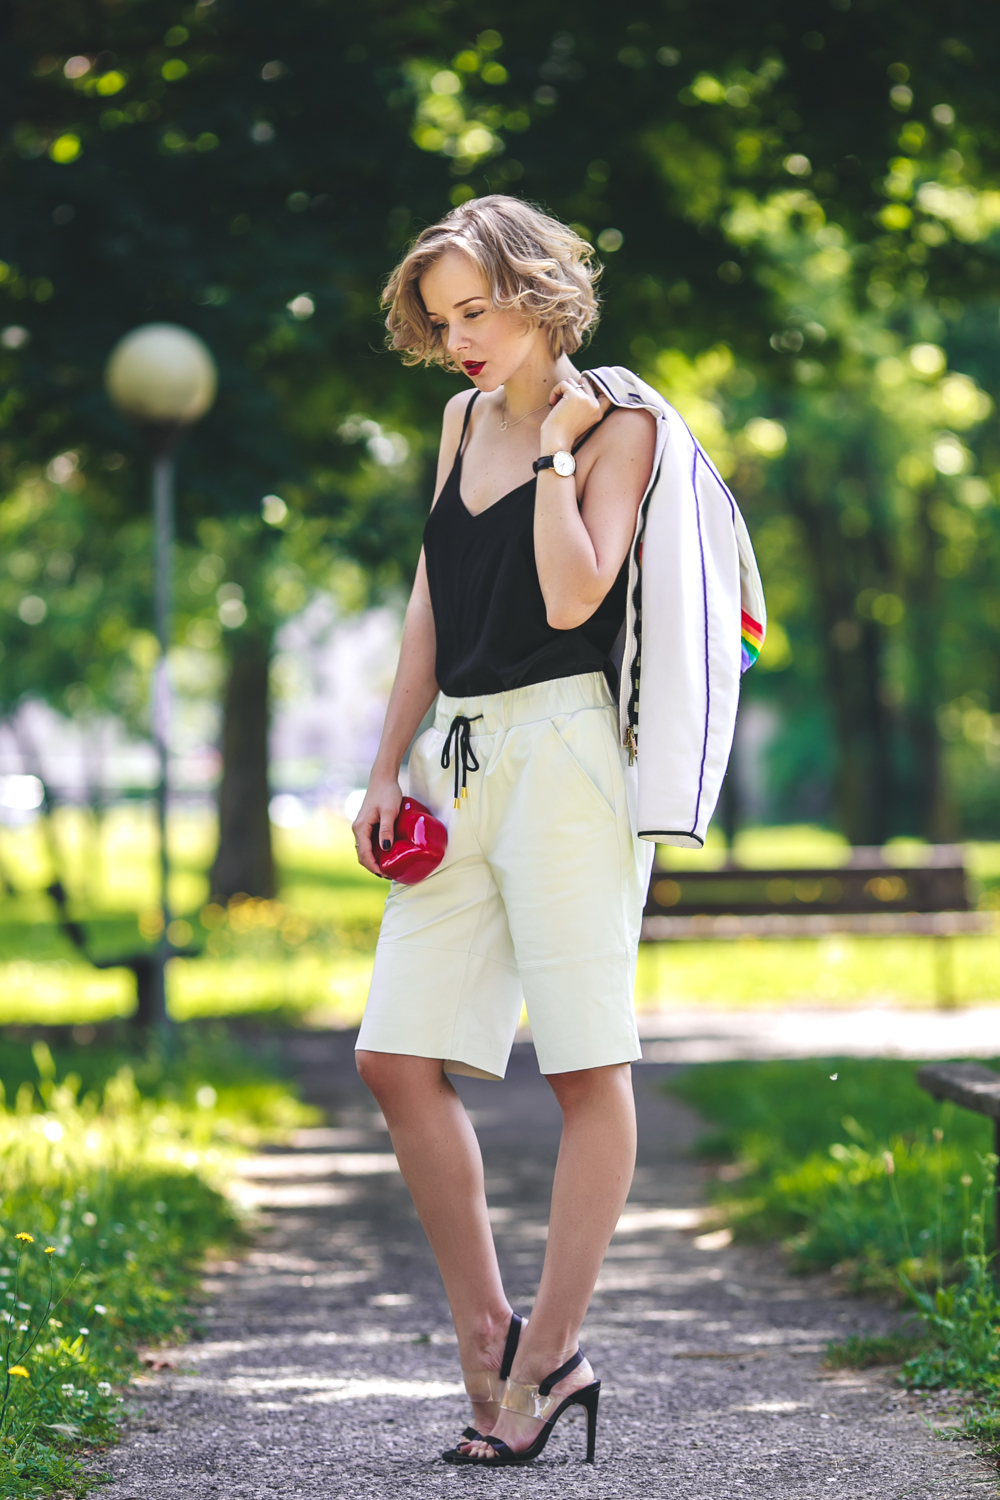 darya kamalova fashion blogger from thecablook is wearing fay snoopy jacket asos white leather shorts cami black top lips vintage clutch-7573